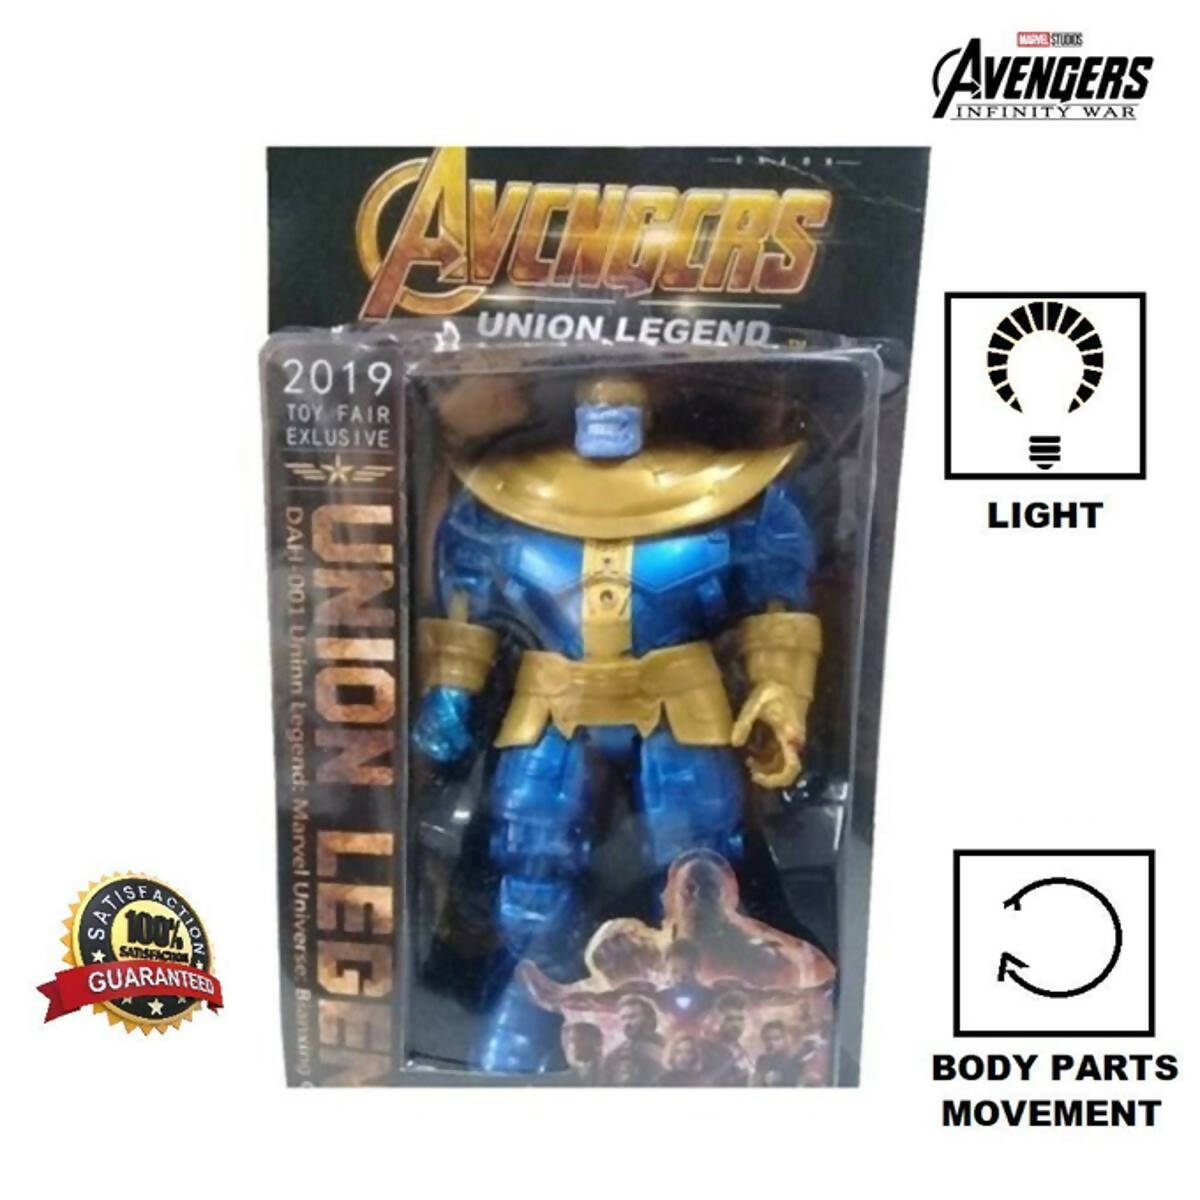 Avengers: Age Of Ultron -Thanos Action Figure with Movable Arms and Legs - 7 inches